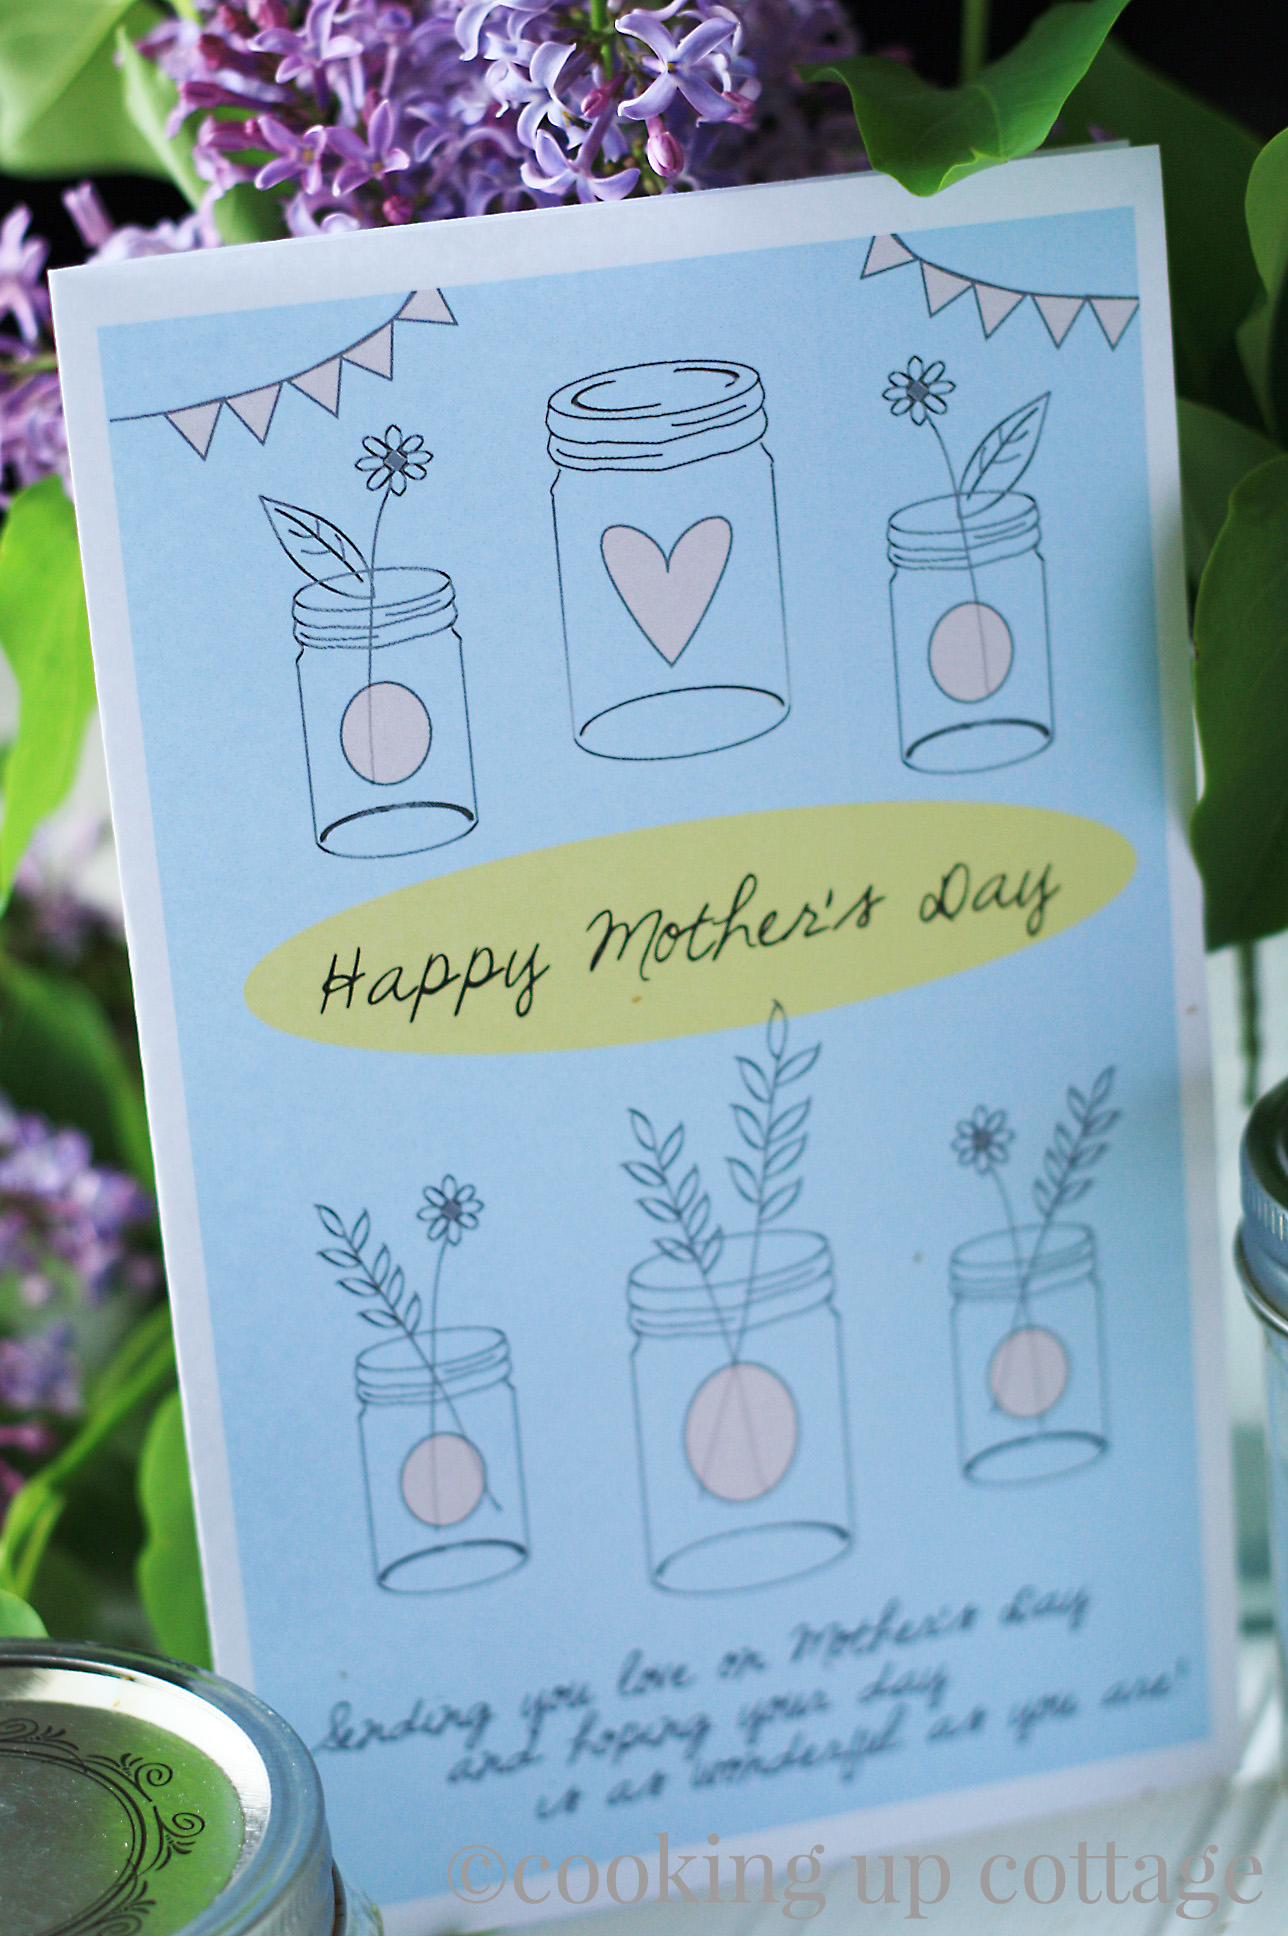 free printable mothers day card cooking up cottage